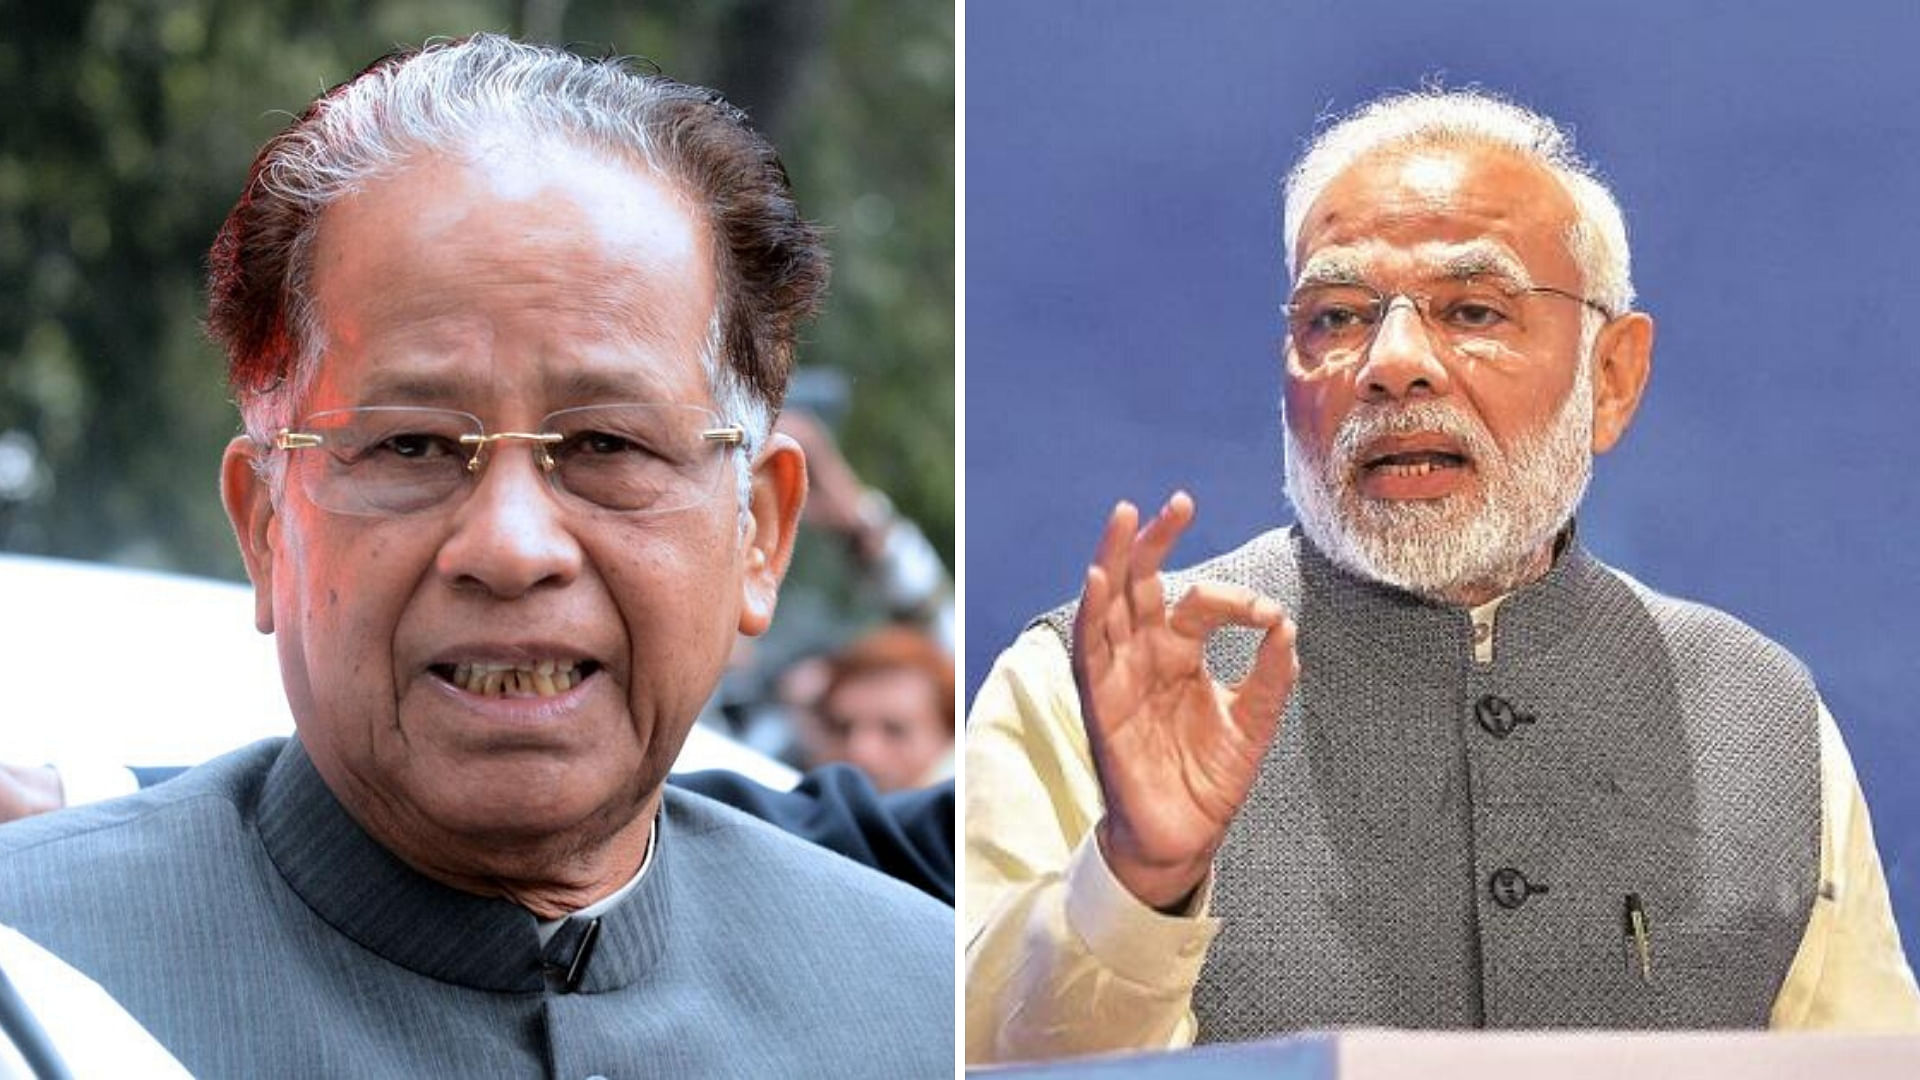 Tarun Gogoi said the Congress government in Assam he had headed had set up detention camps in the state as per a Gauhati High Court order.